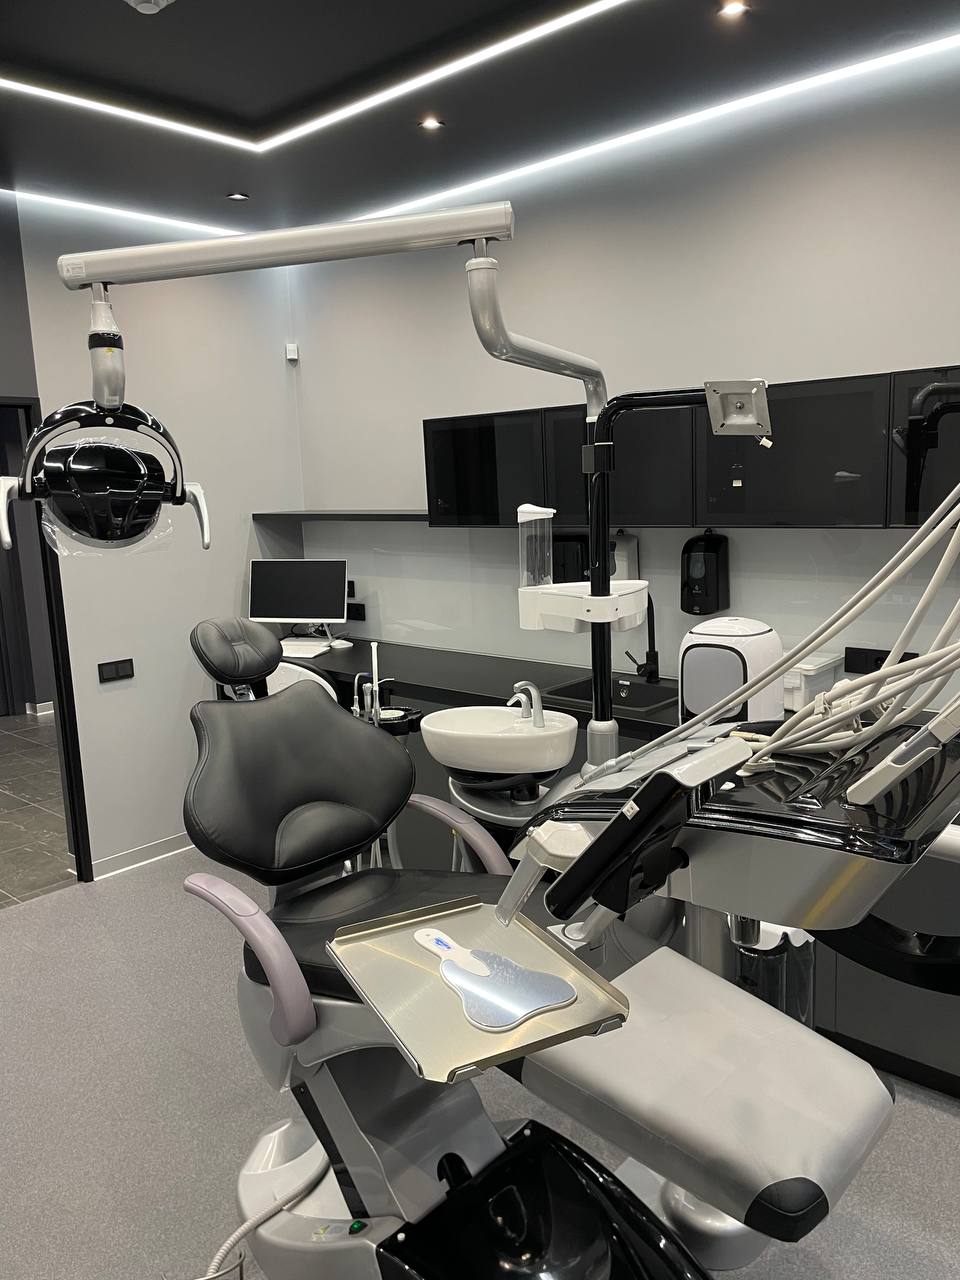 Dentistry in black style with Dental Equipment Safety